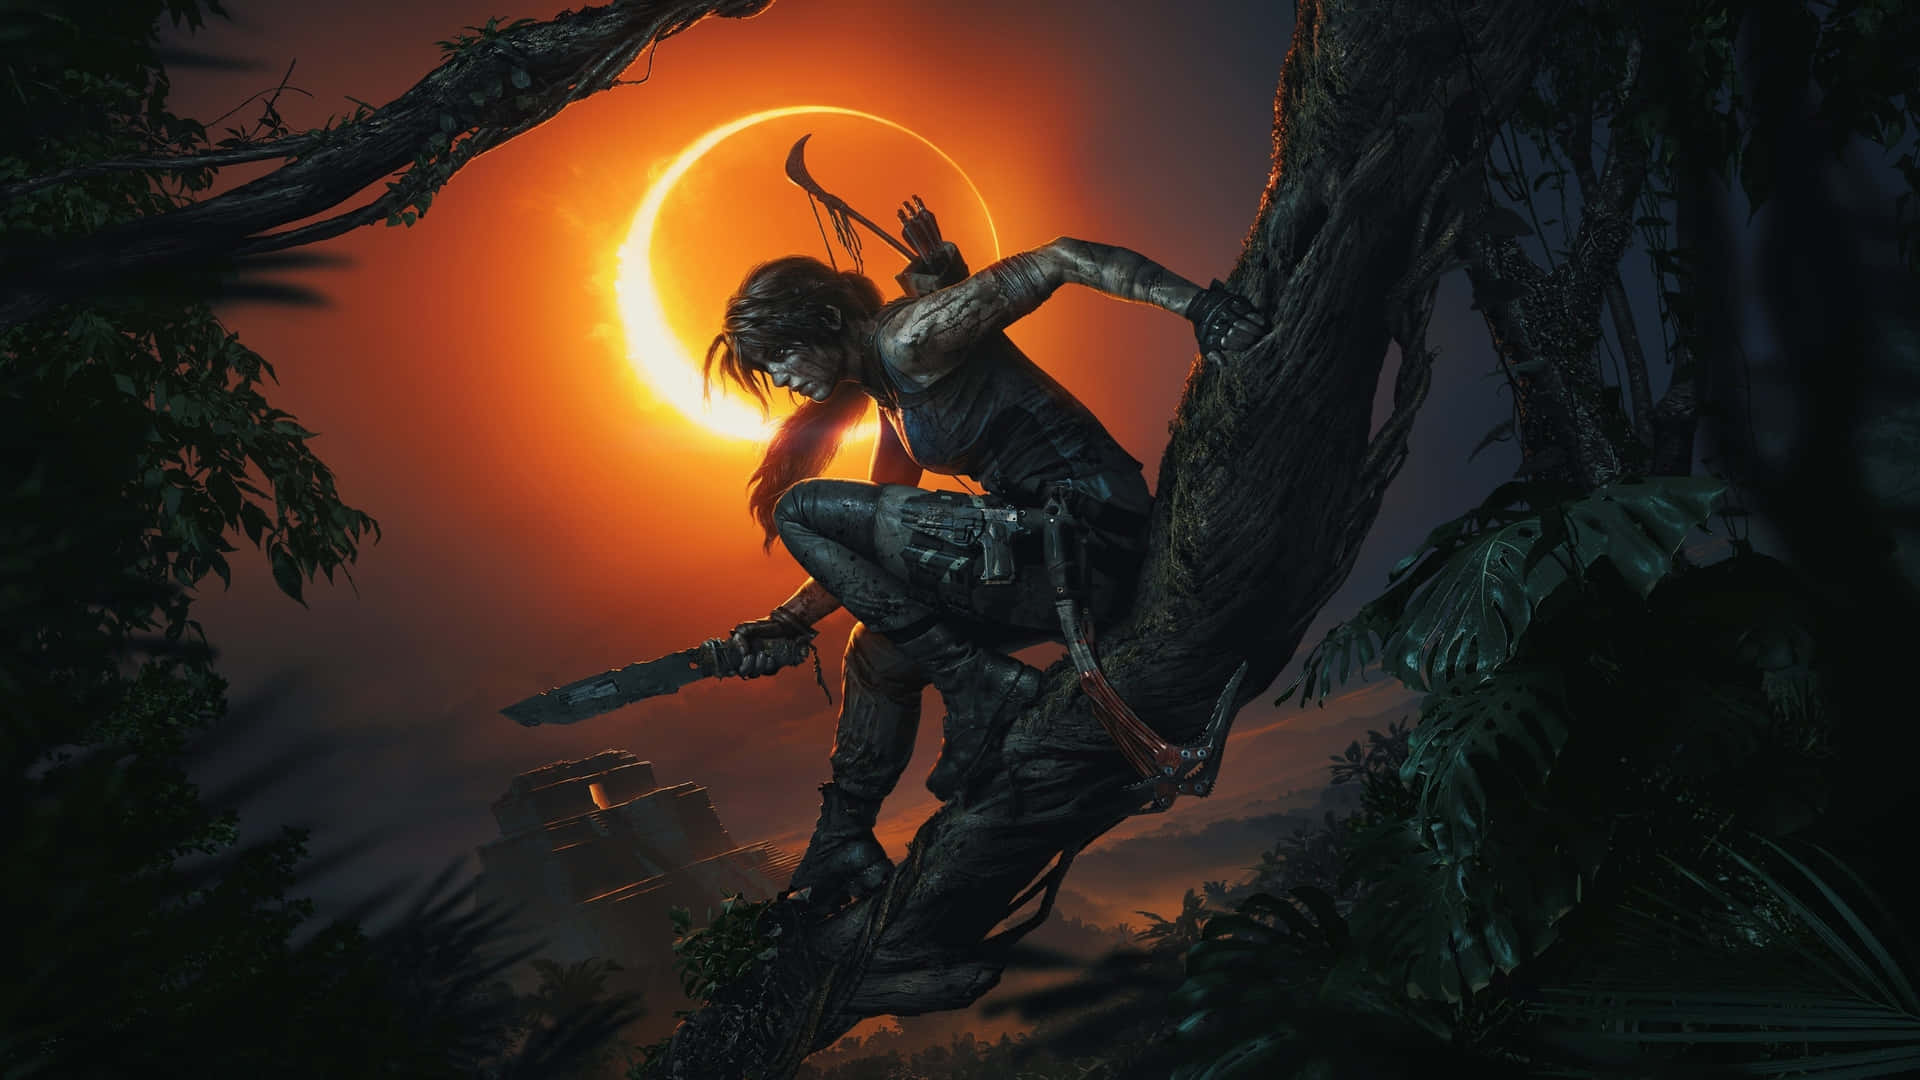 Climb and Explore the World of Shadow of the Tomb Raider